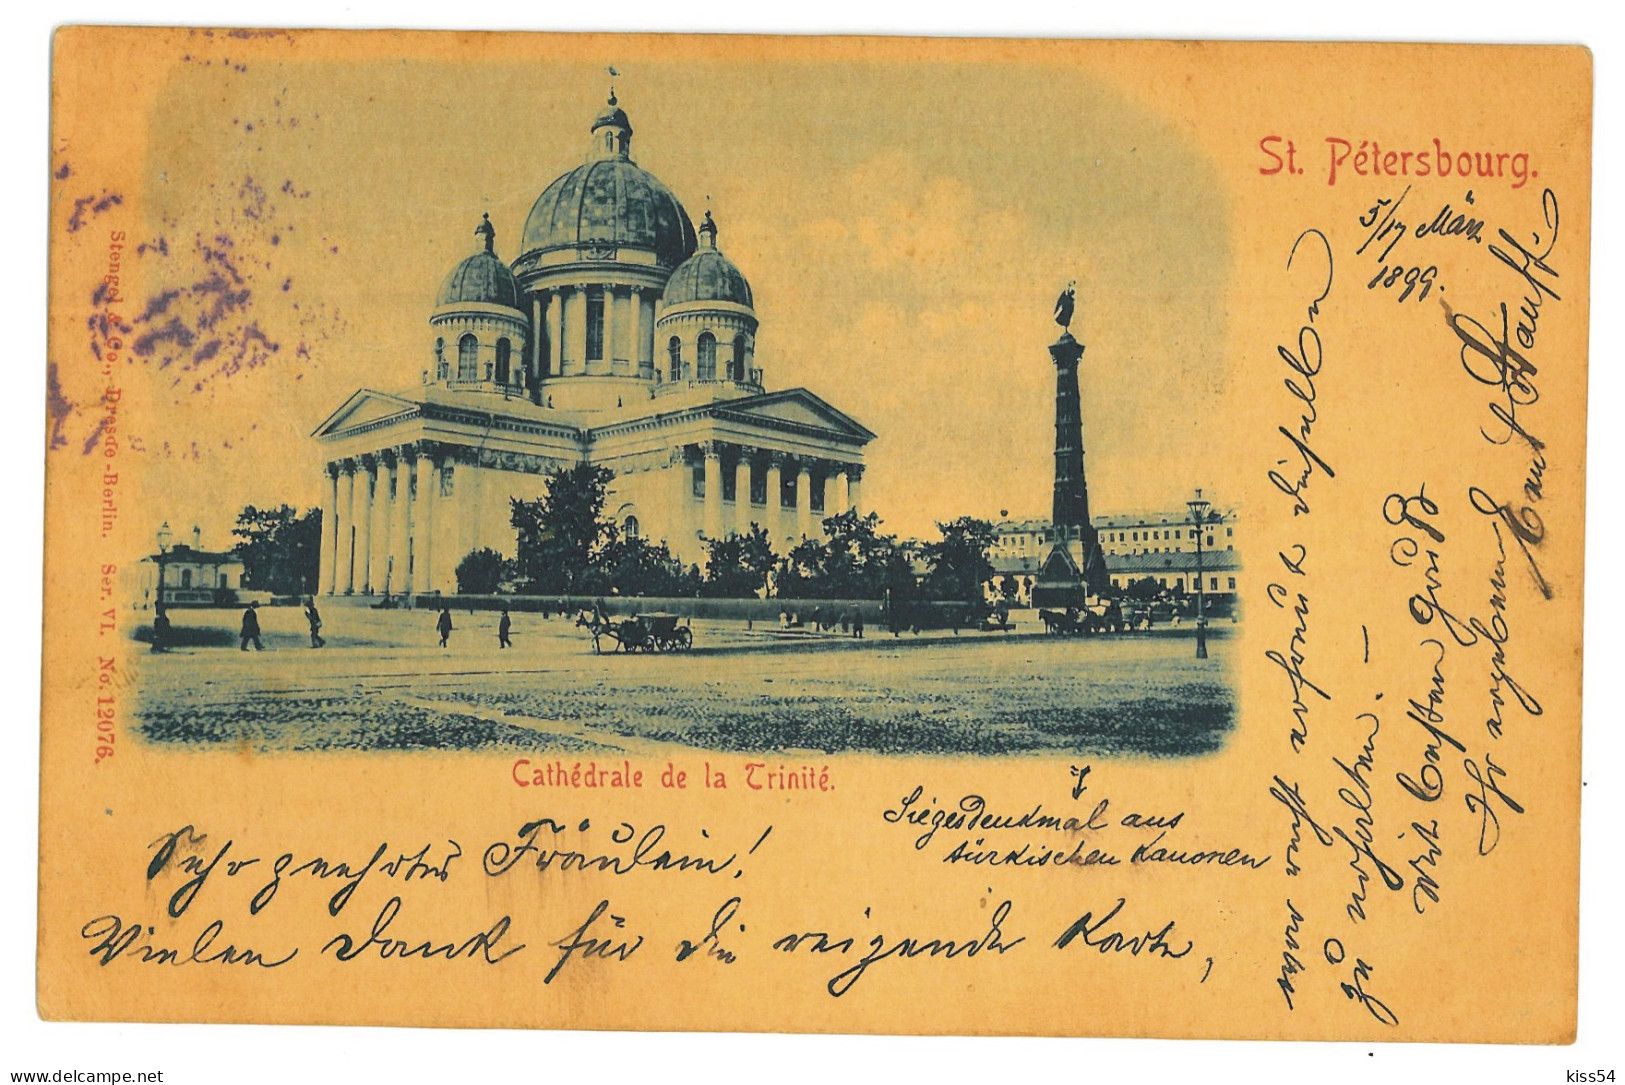 RUS 48 - 23749 SAINT PETERSBURG, Cathedral, Litho, Russia - Old Postcard - Used - 1899 - Russia